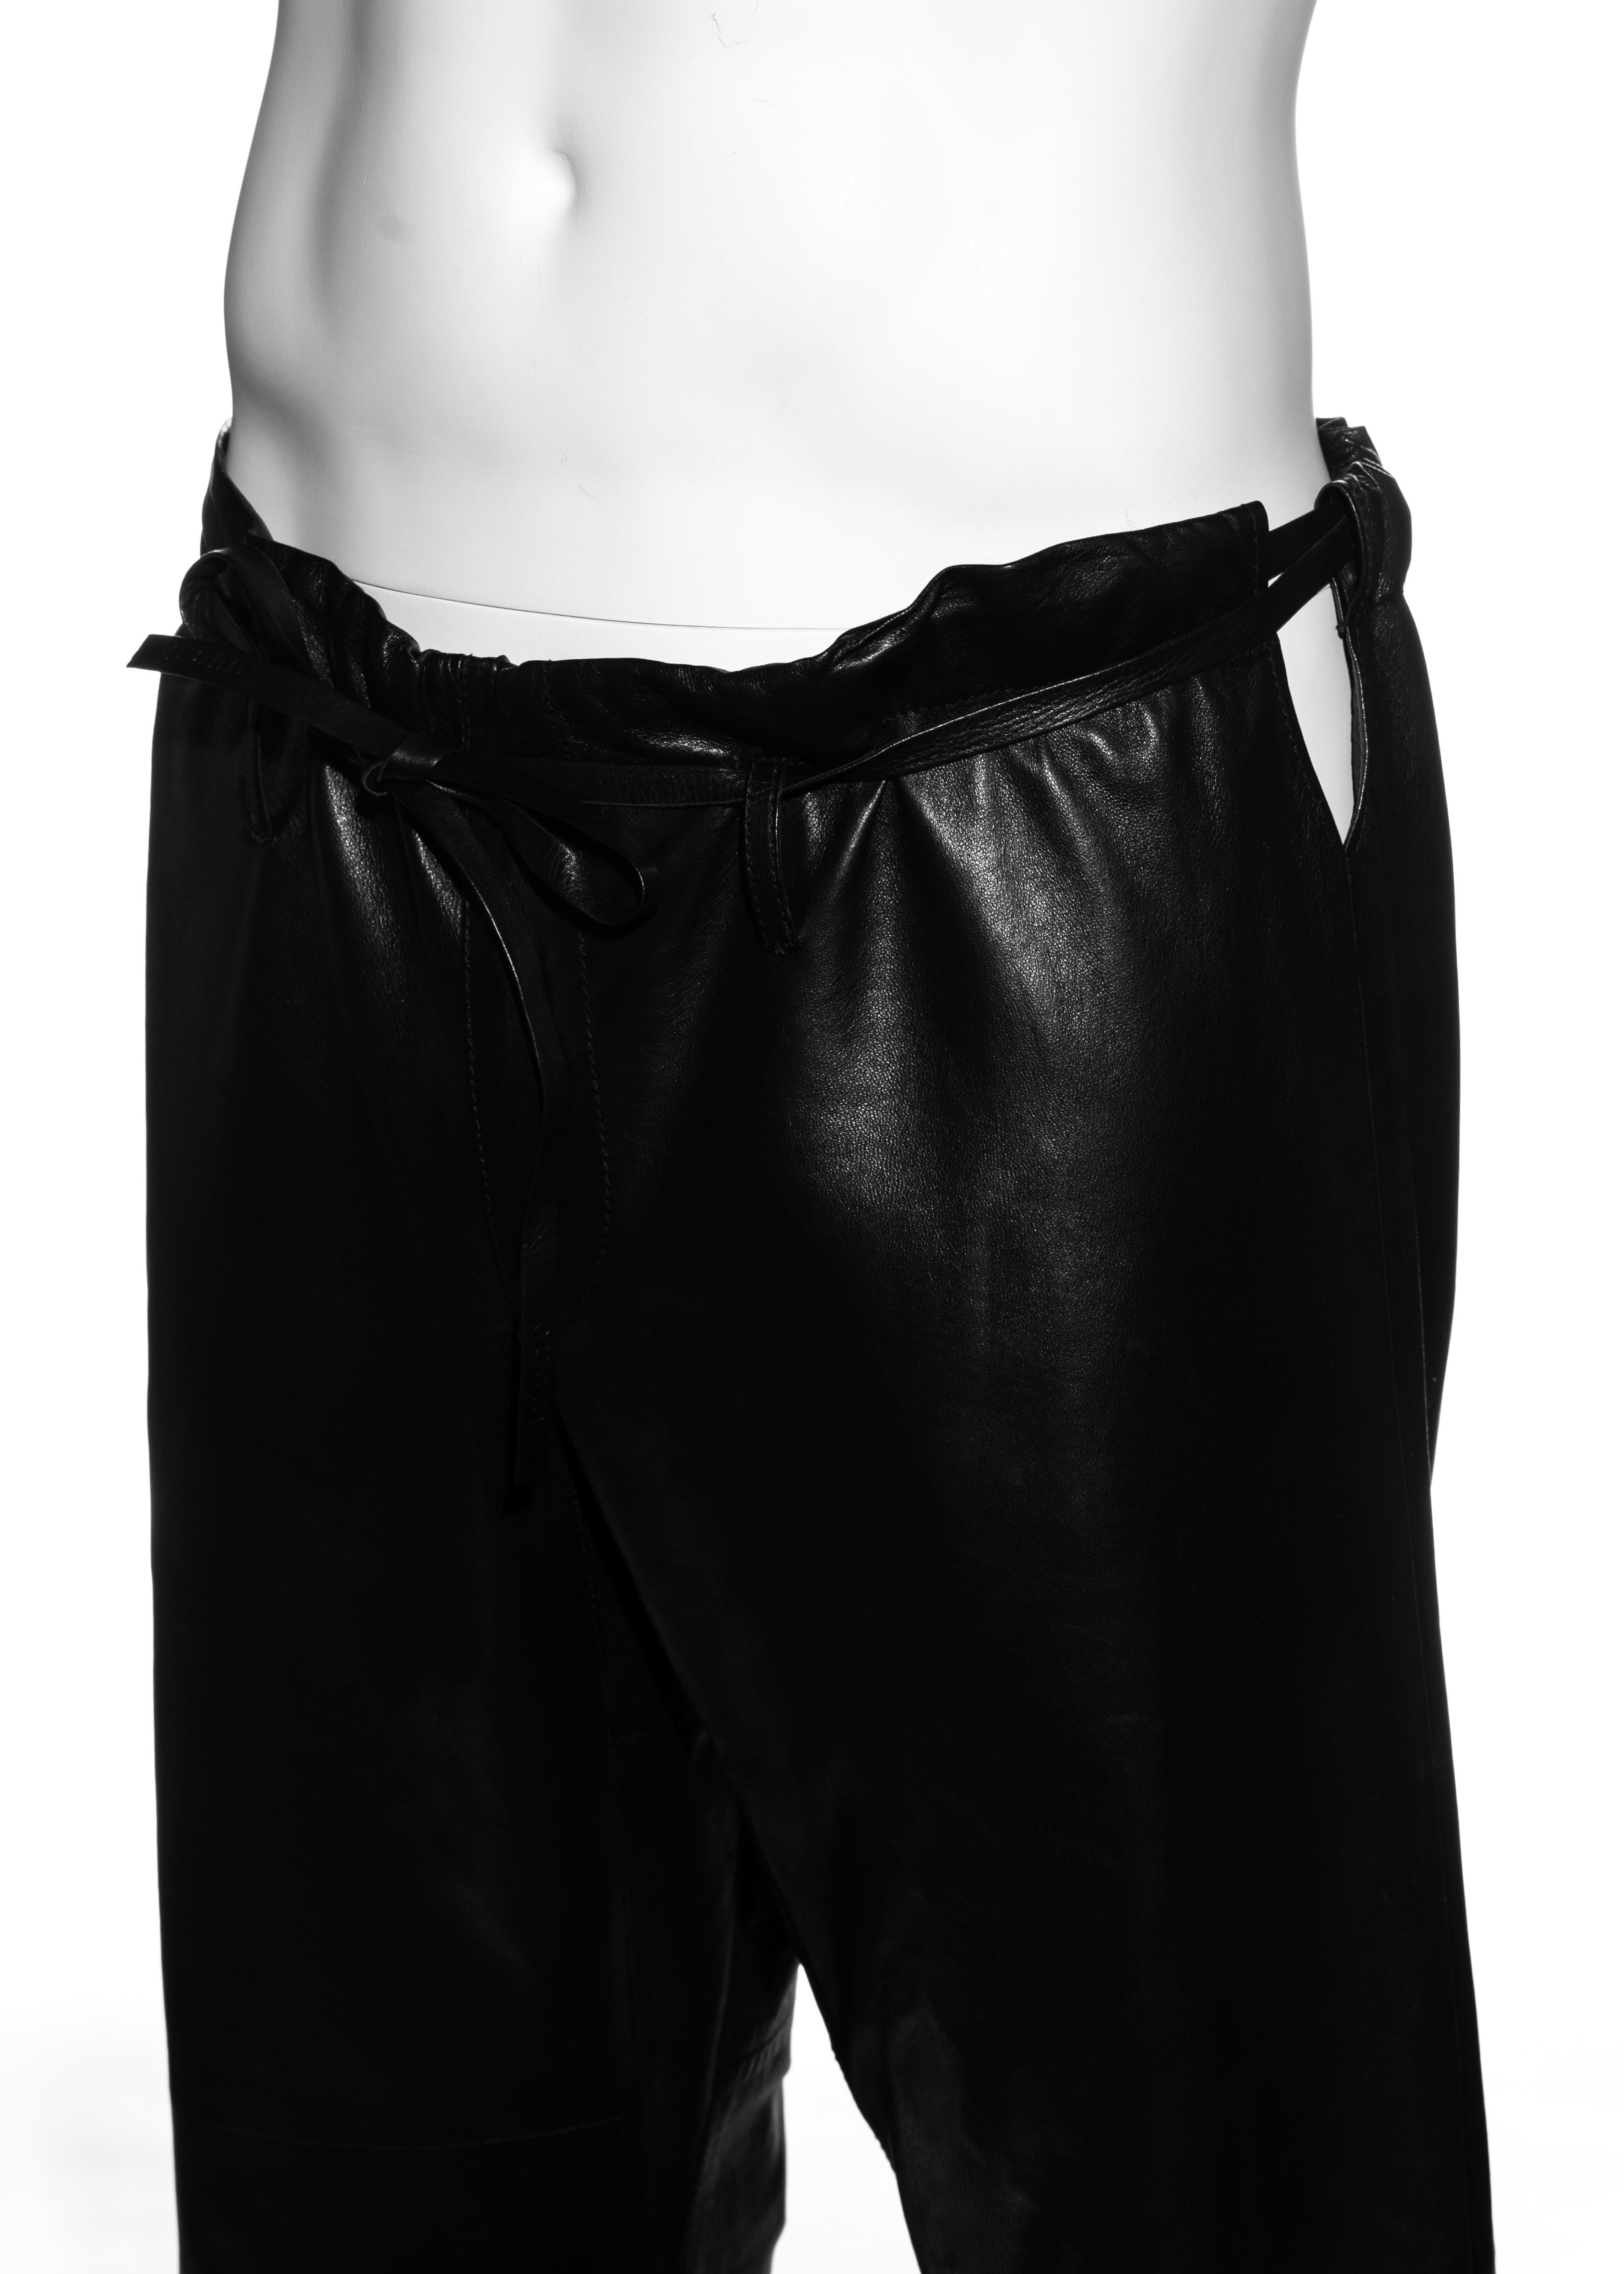 Black Gucci by Tom Ford unisex black lambskin leather wide-leg pants, ss 2001